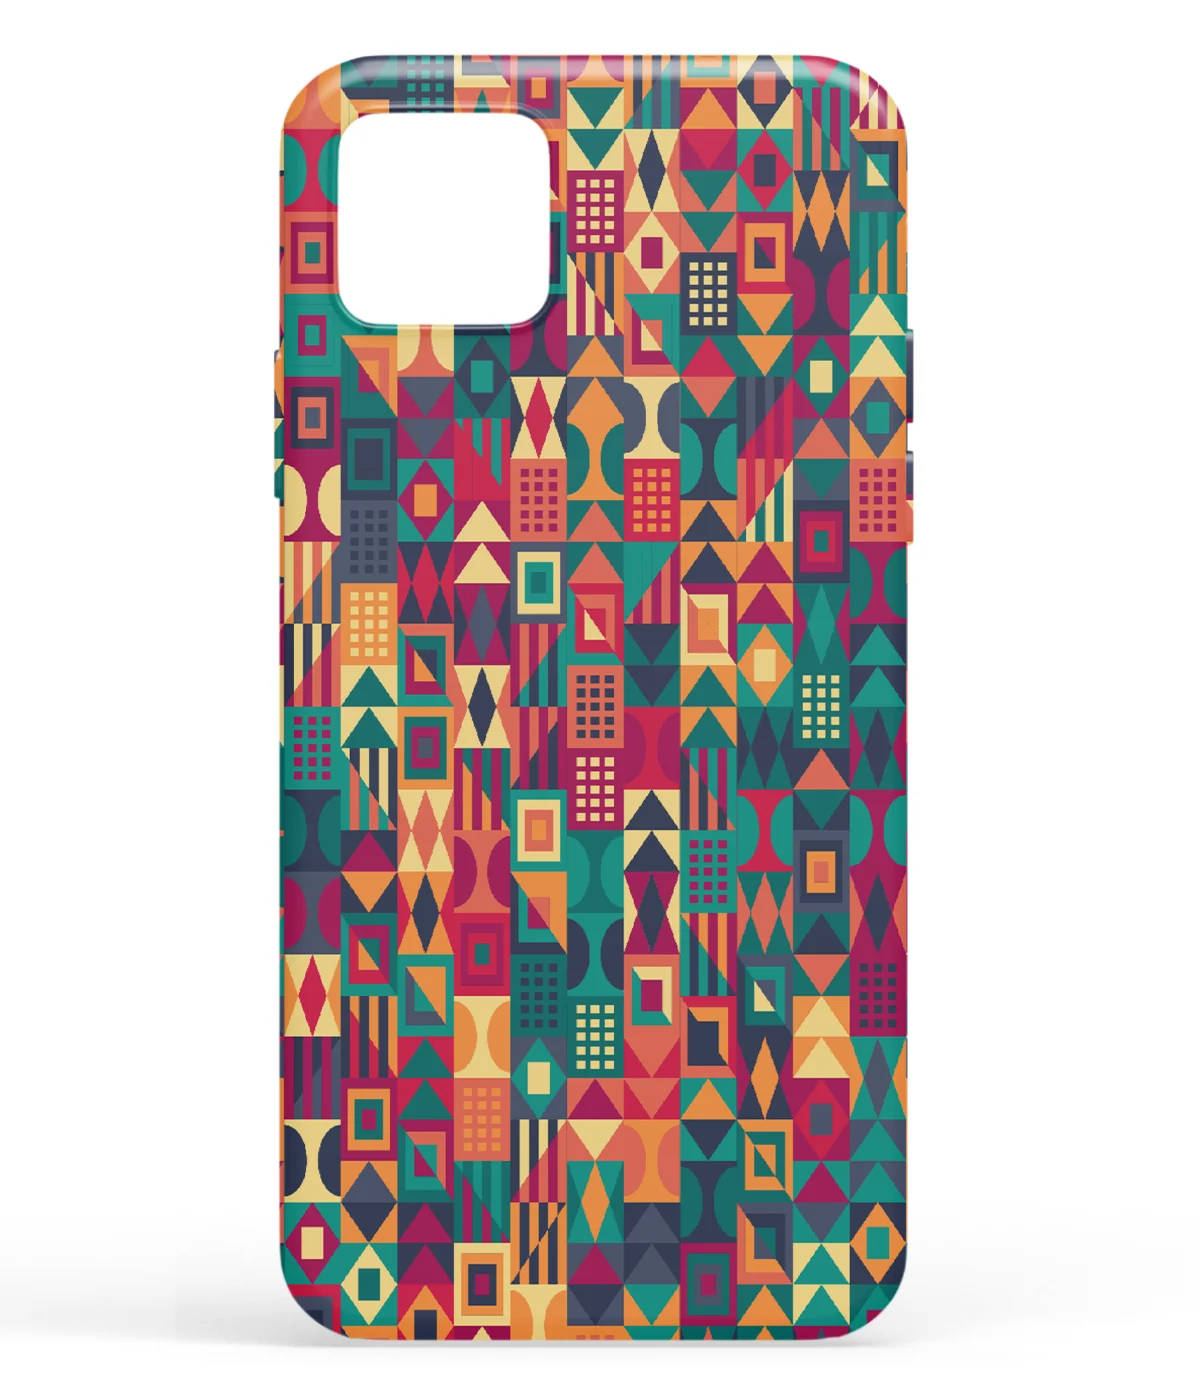 Geometrical Shapes Pattern Printed Soft Silicone Mobile Back Cover